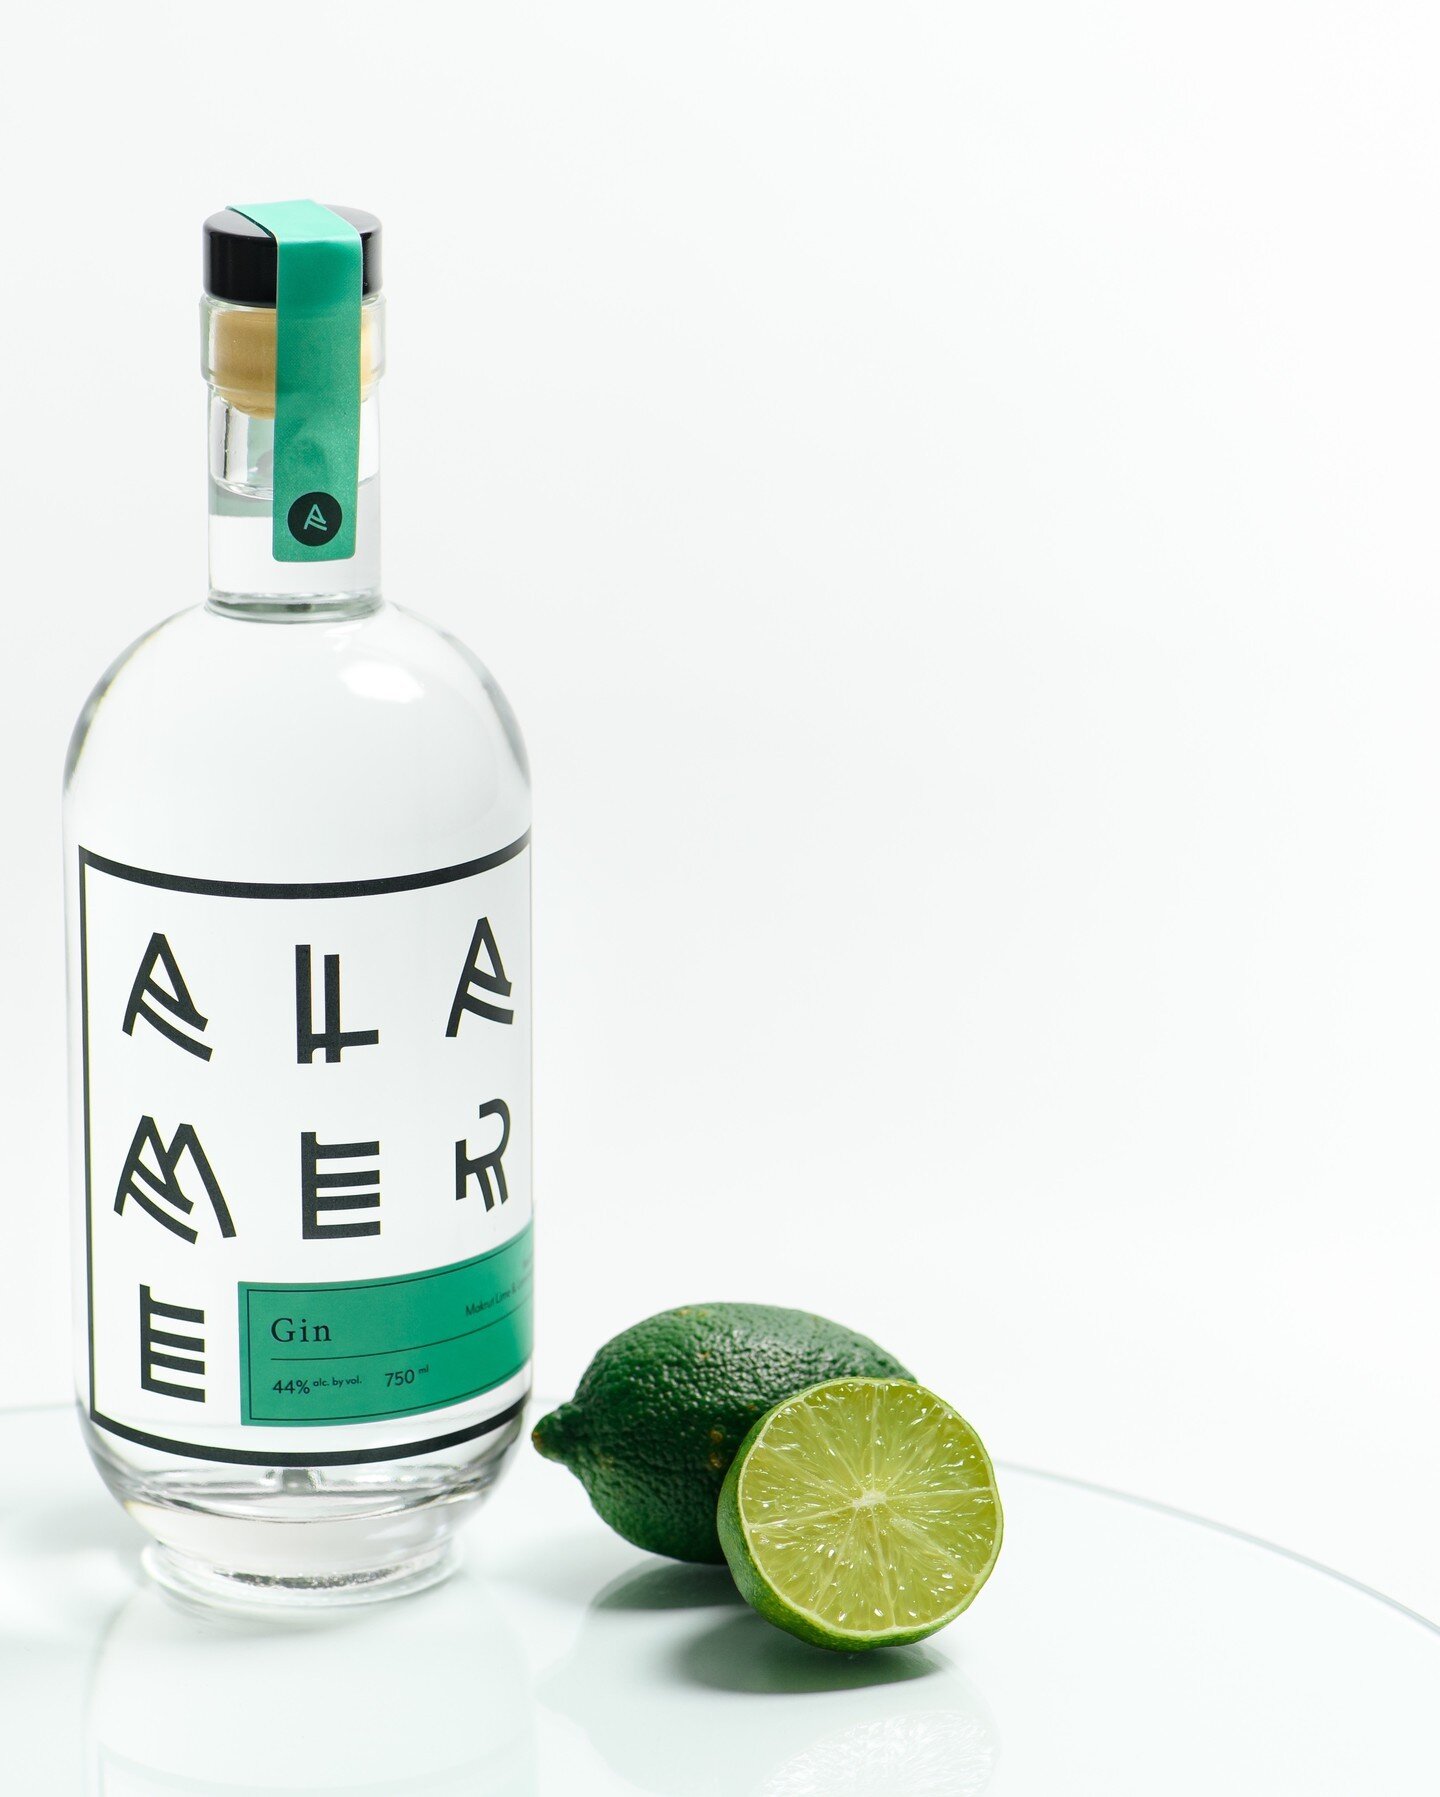 A little lime goes a long way! Our Gin with Makrut Lime and Lemongrass is rich with the natural flavor of citrus oils.